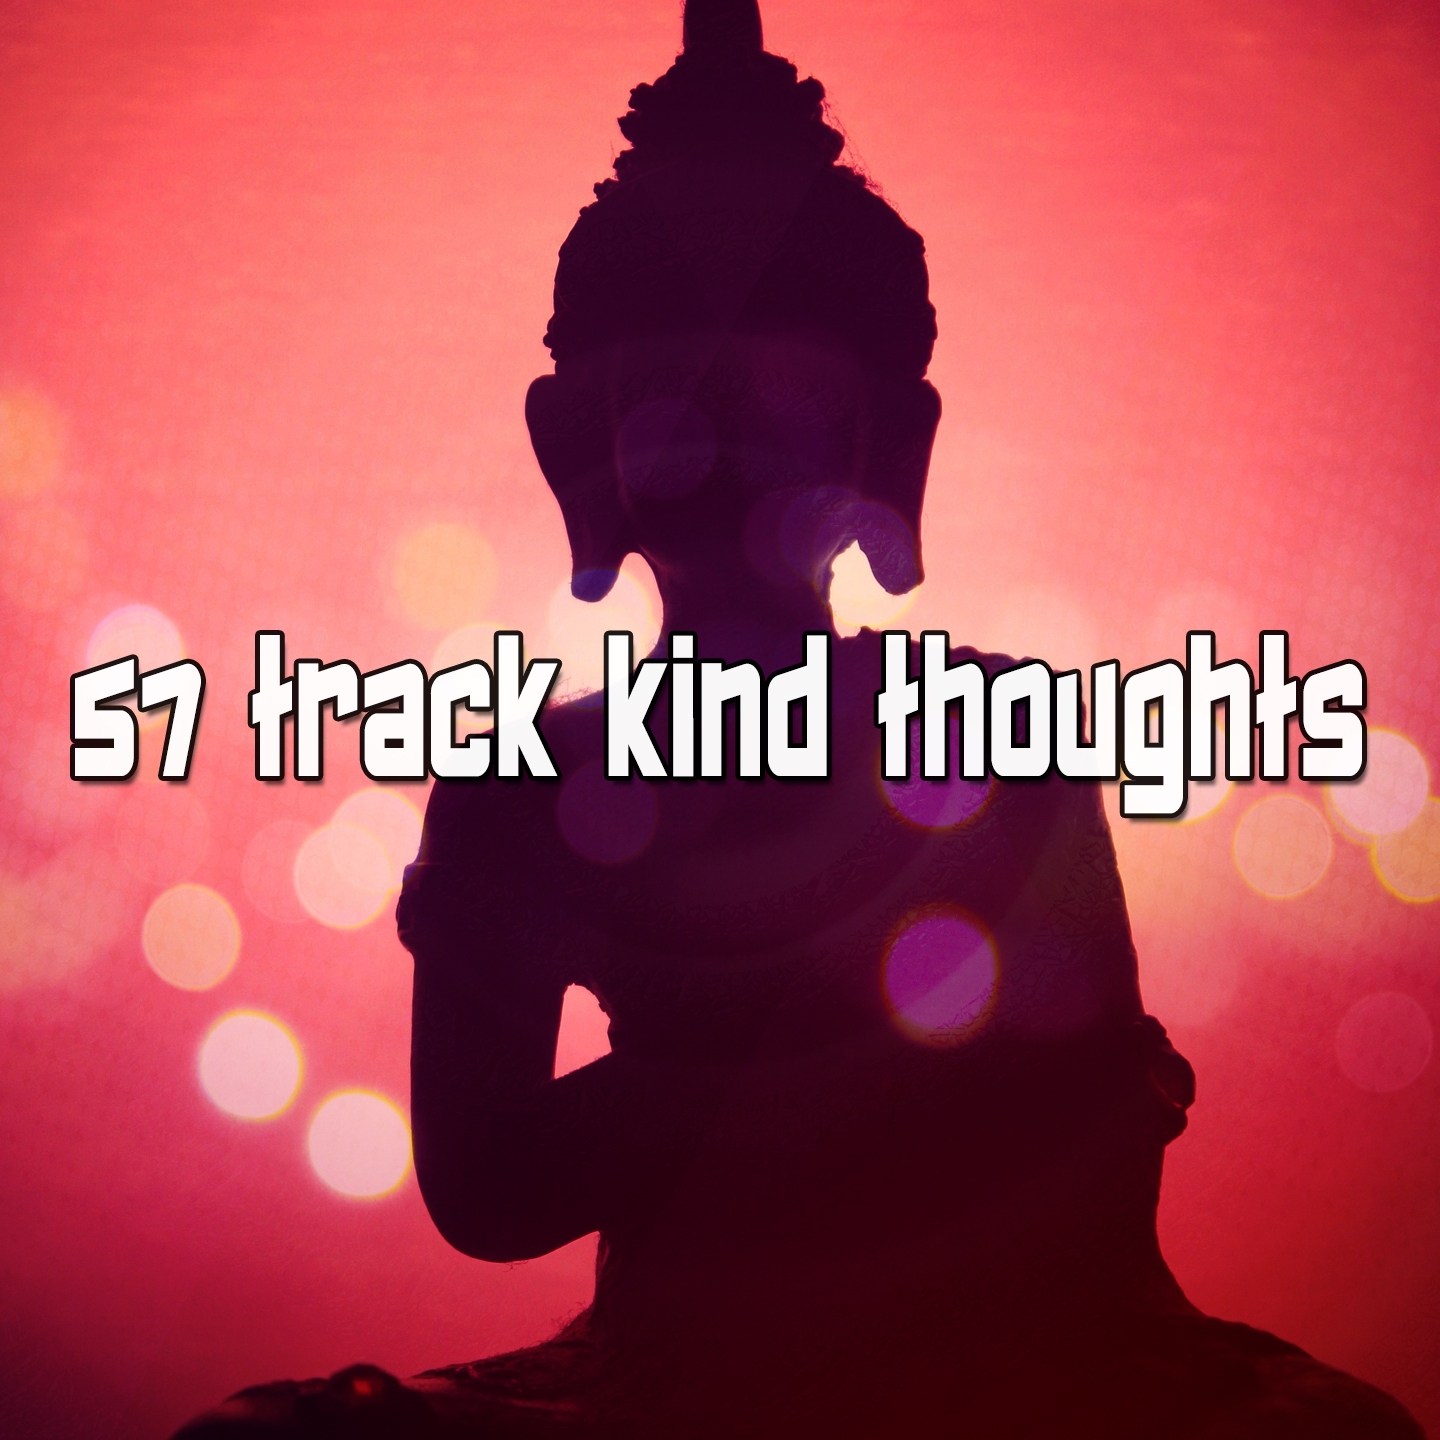 57 Track Kind Thoughts